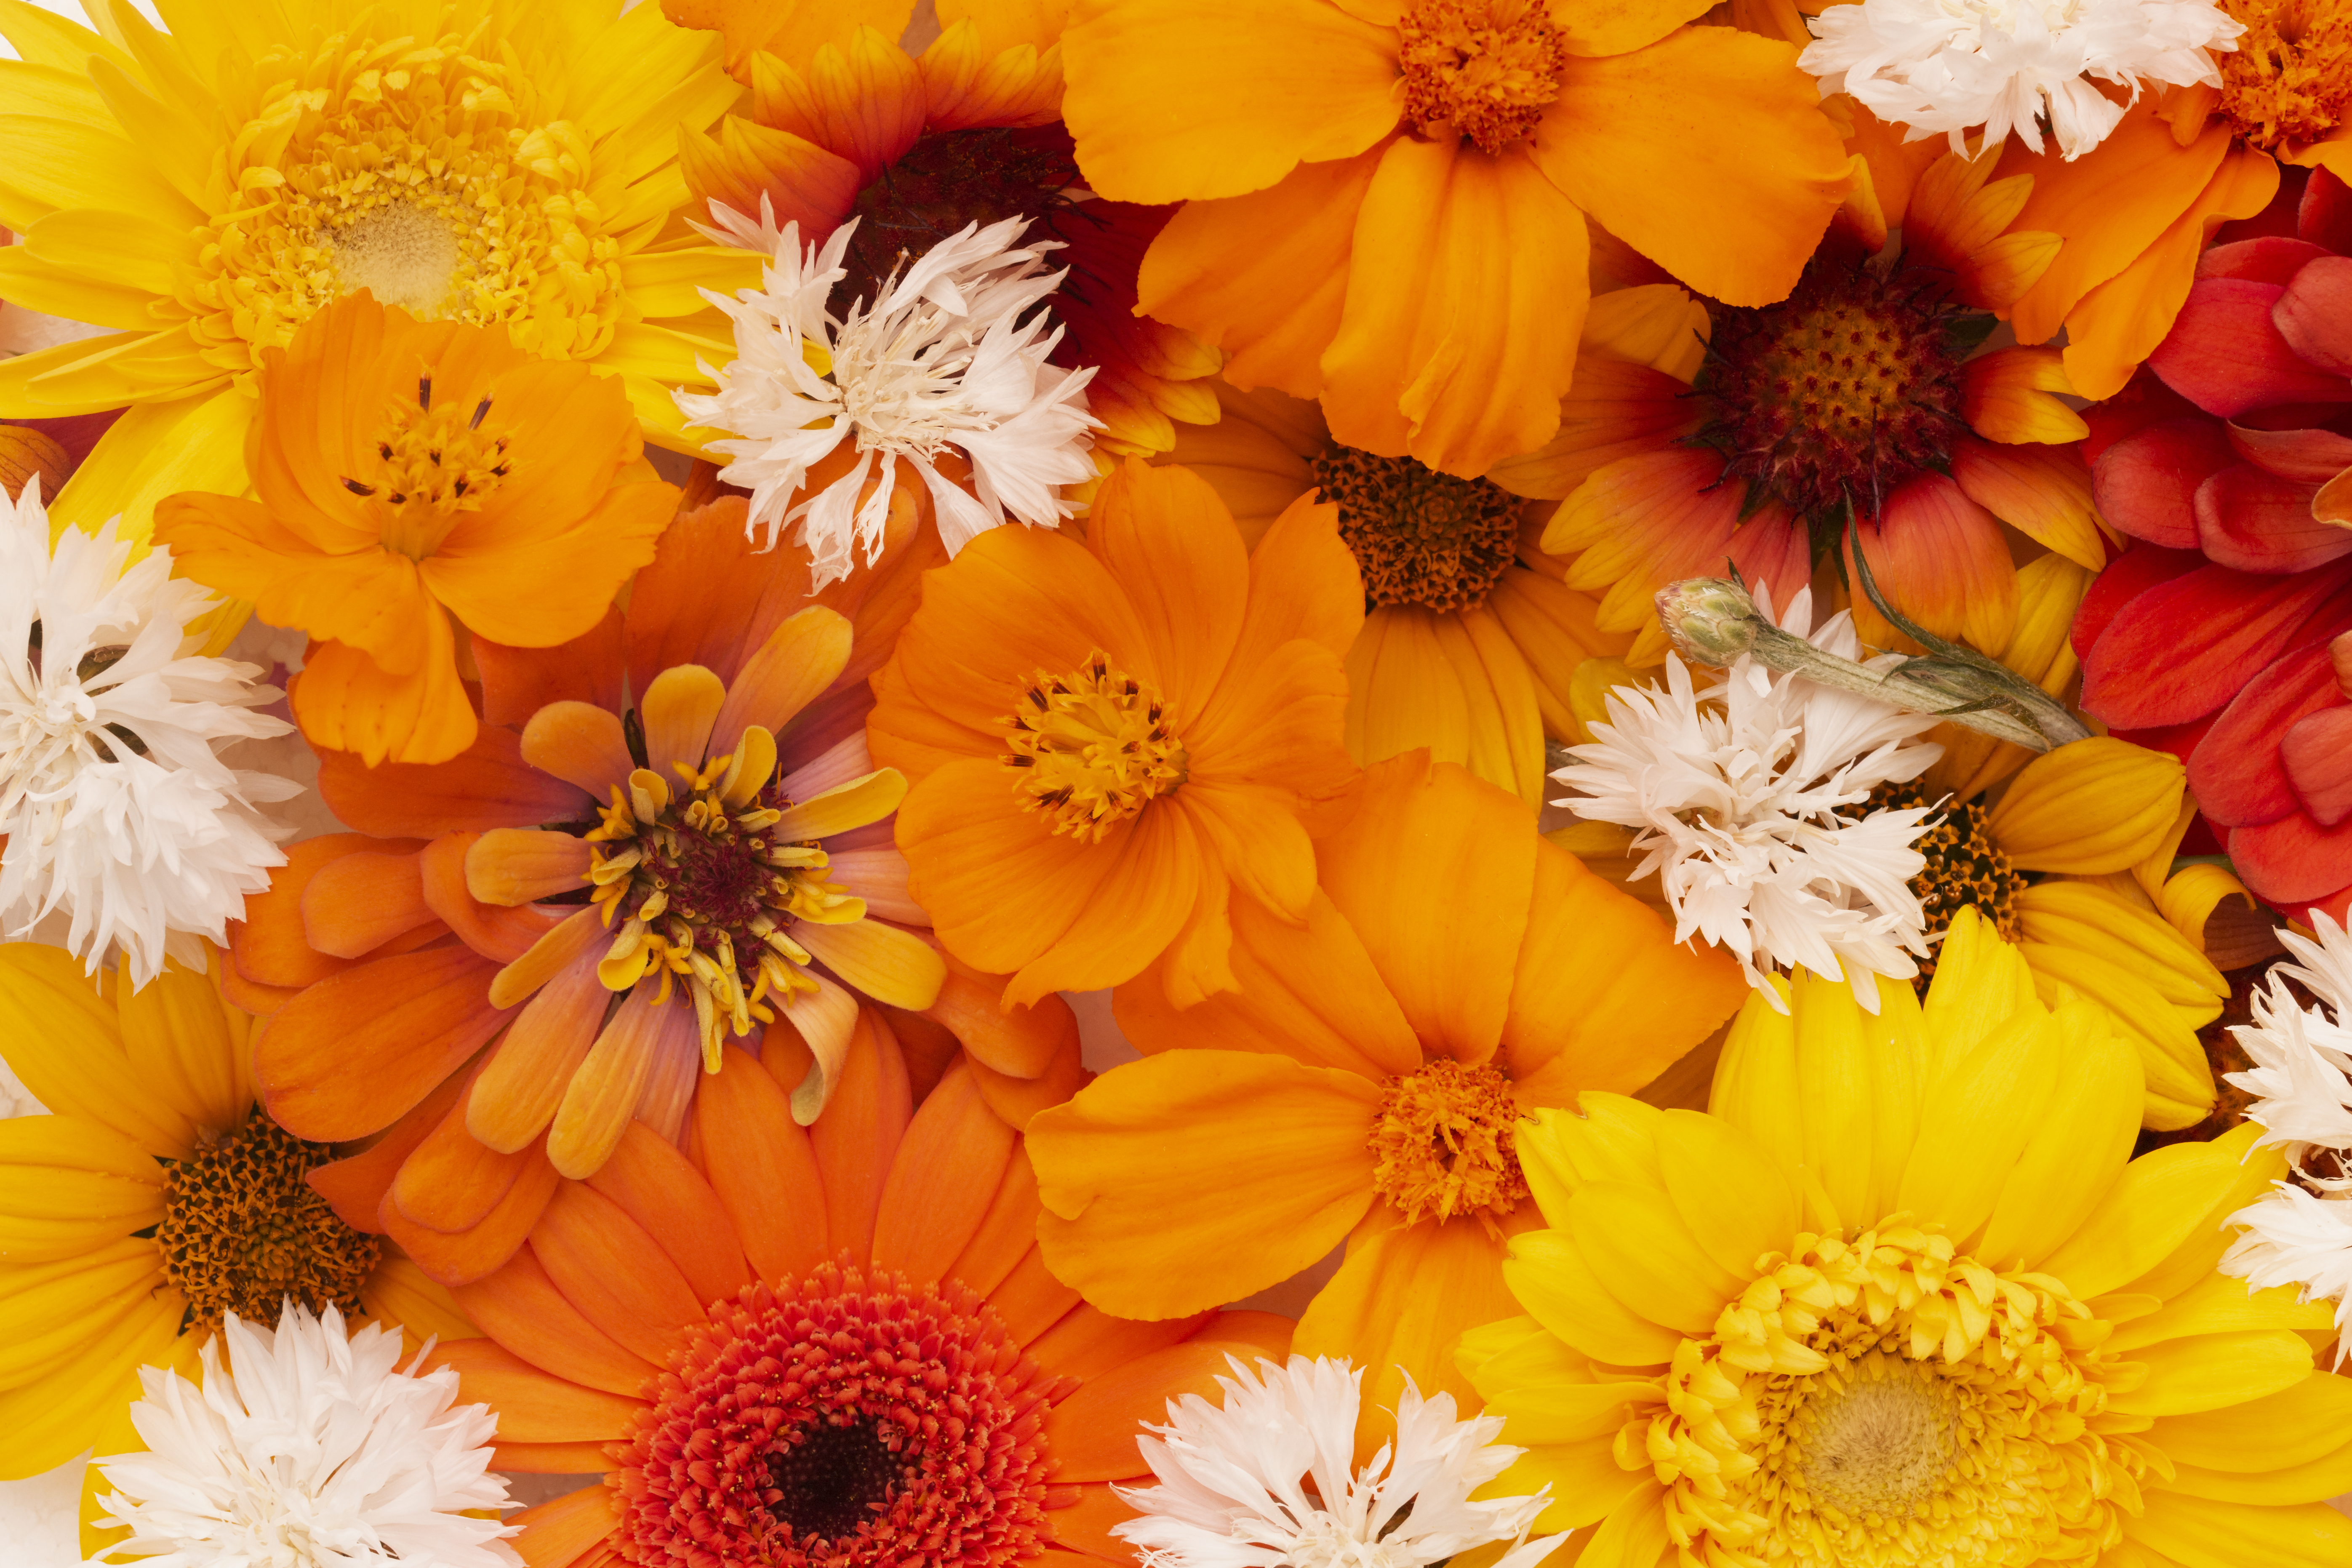 An image of orange, yellow and white flowers